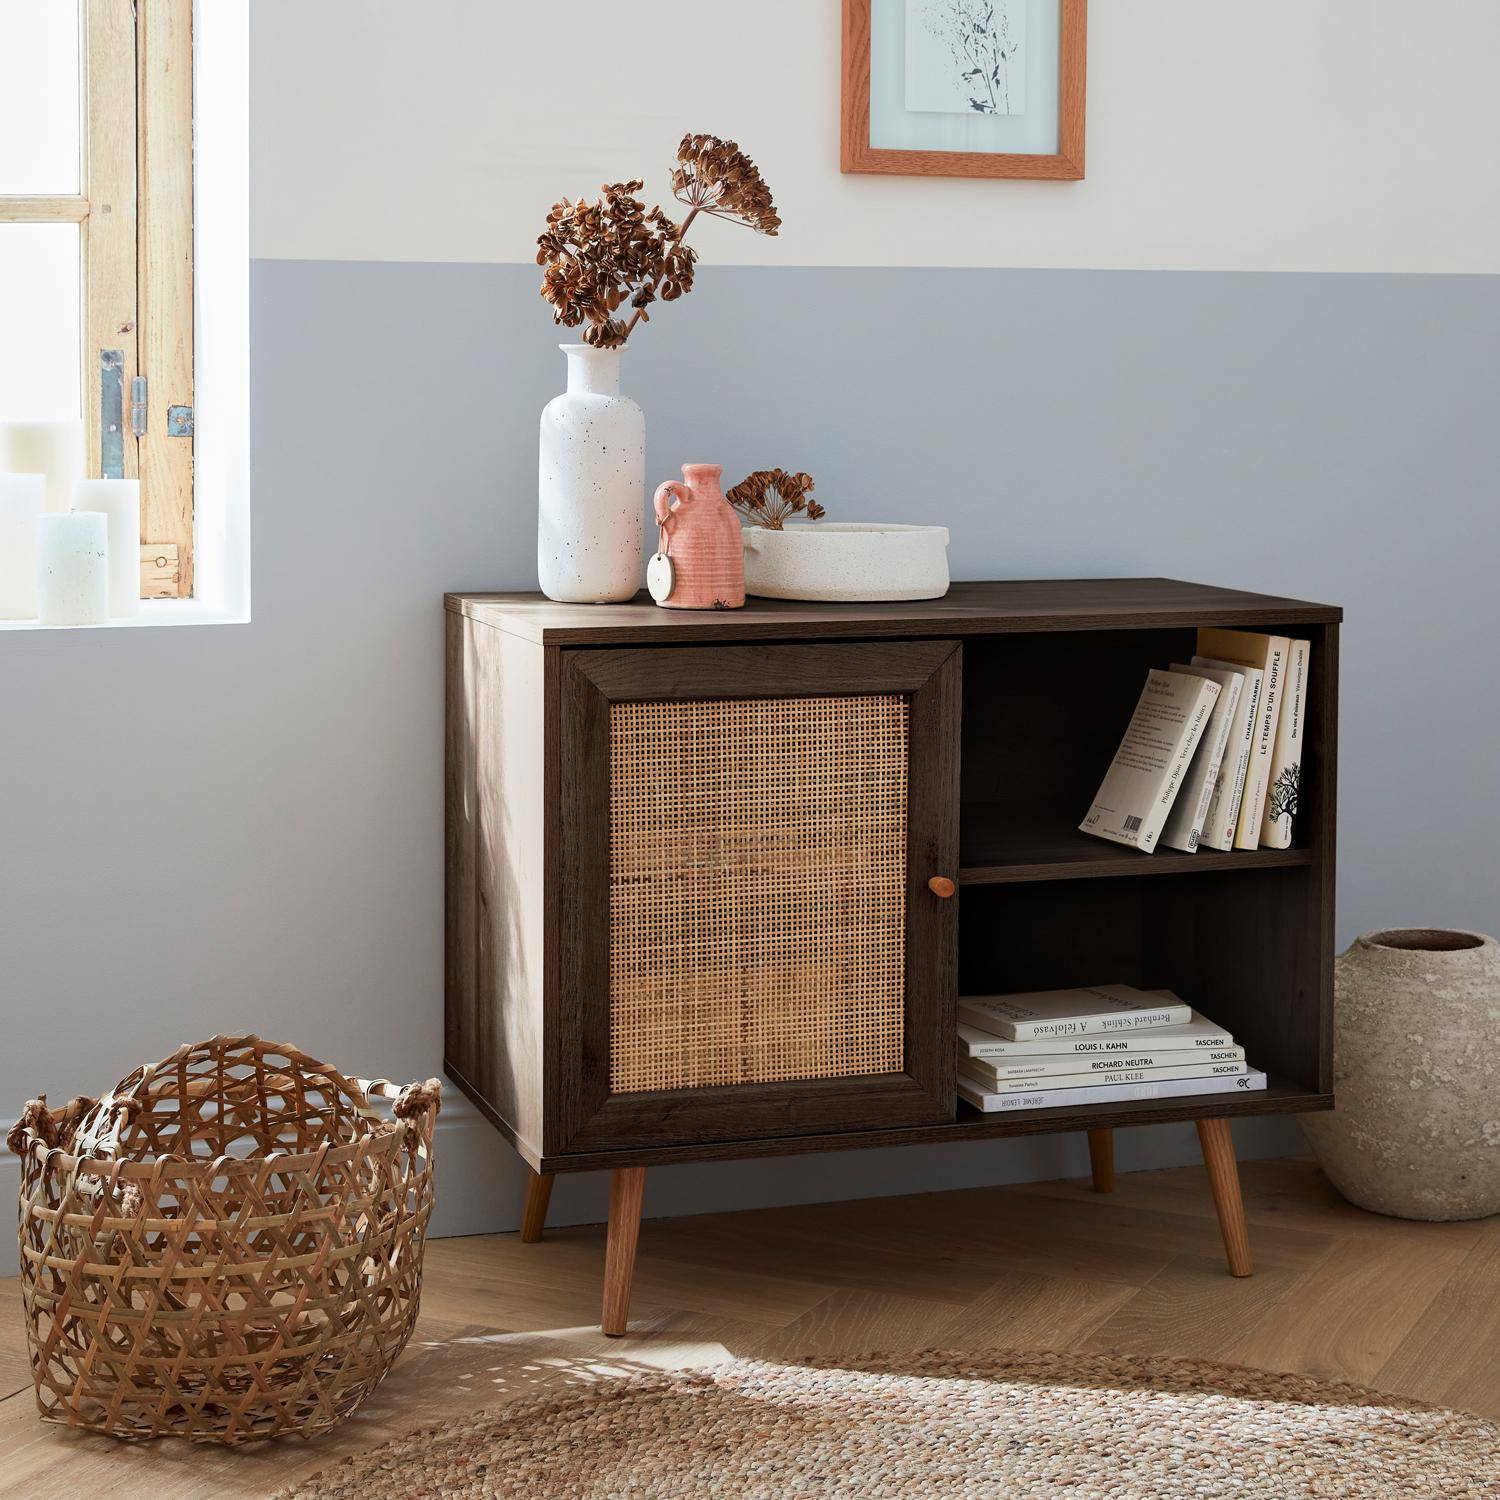 Wooden and cane rattan detail storage cabinet with 2 shelves, 1 cupboard, Scandi-style legs, 80x39x65.8cm - Boheme - Dark wood colour Photo1